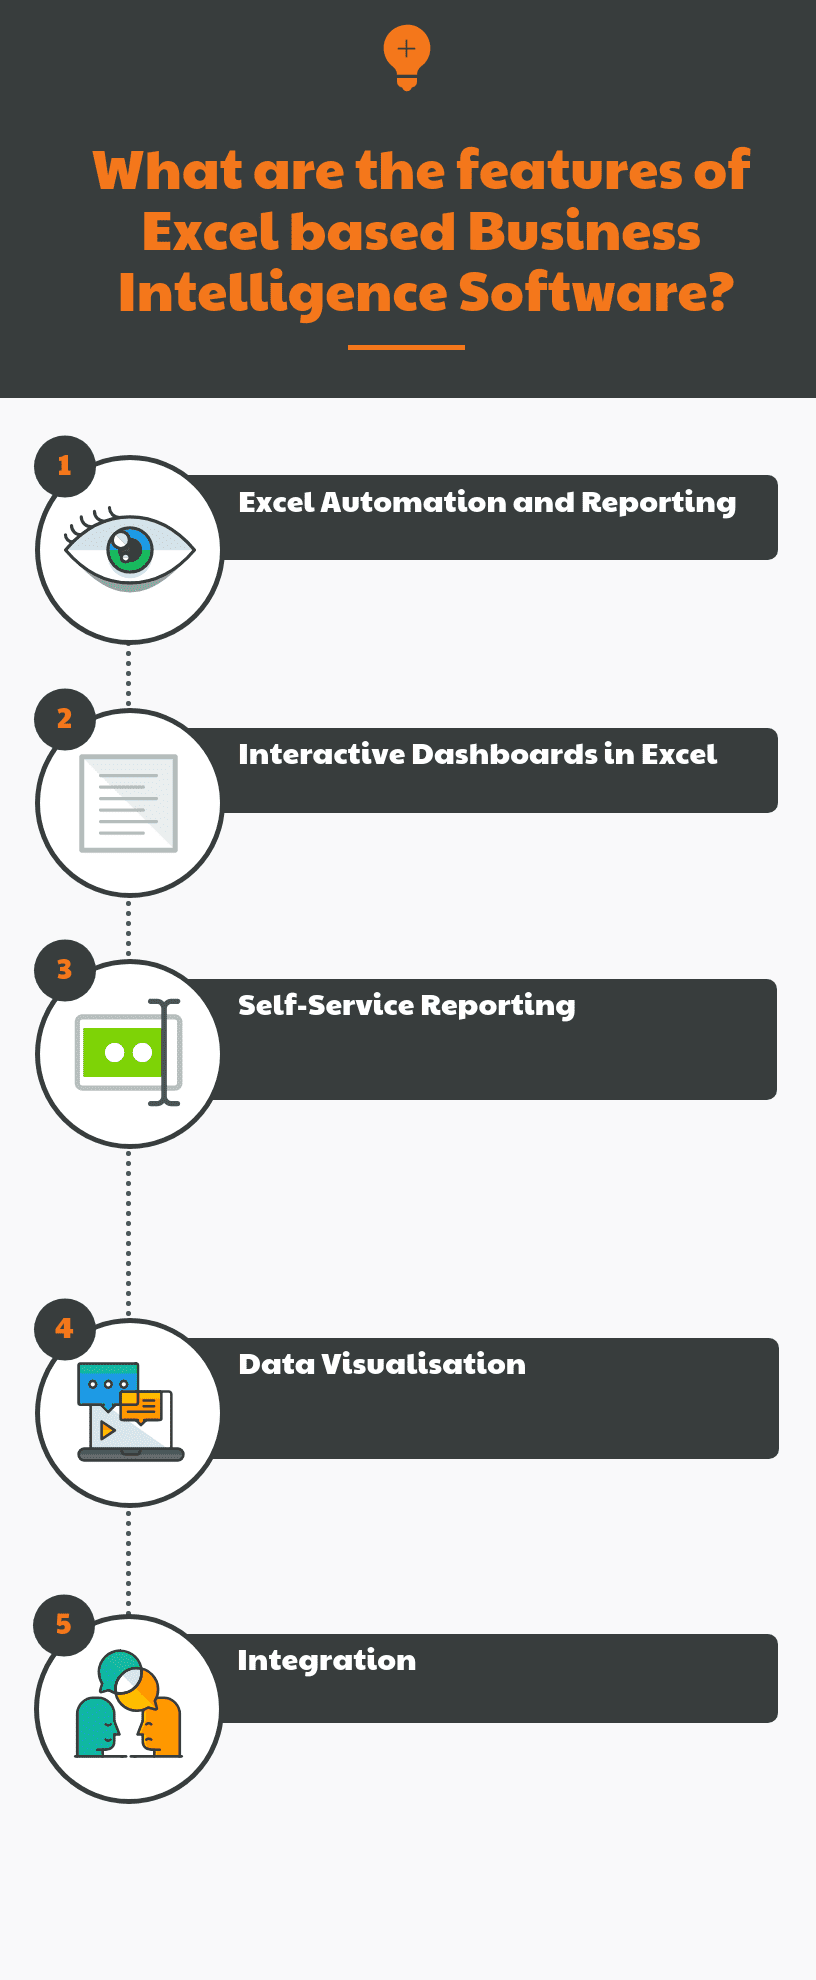 What are the features of Excel based Business Intelligence Software?